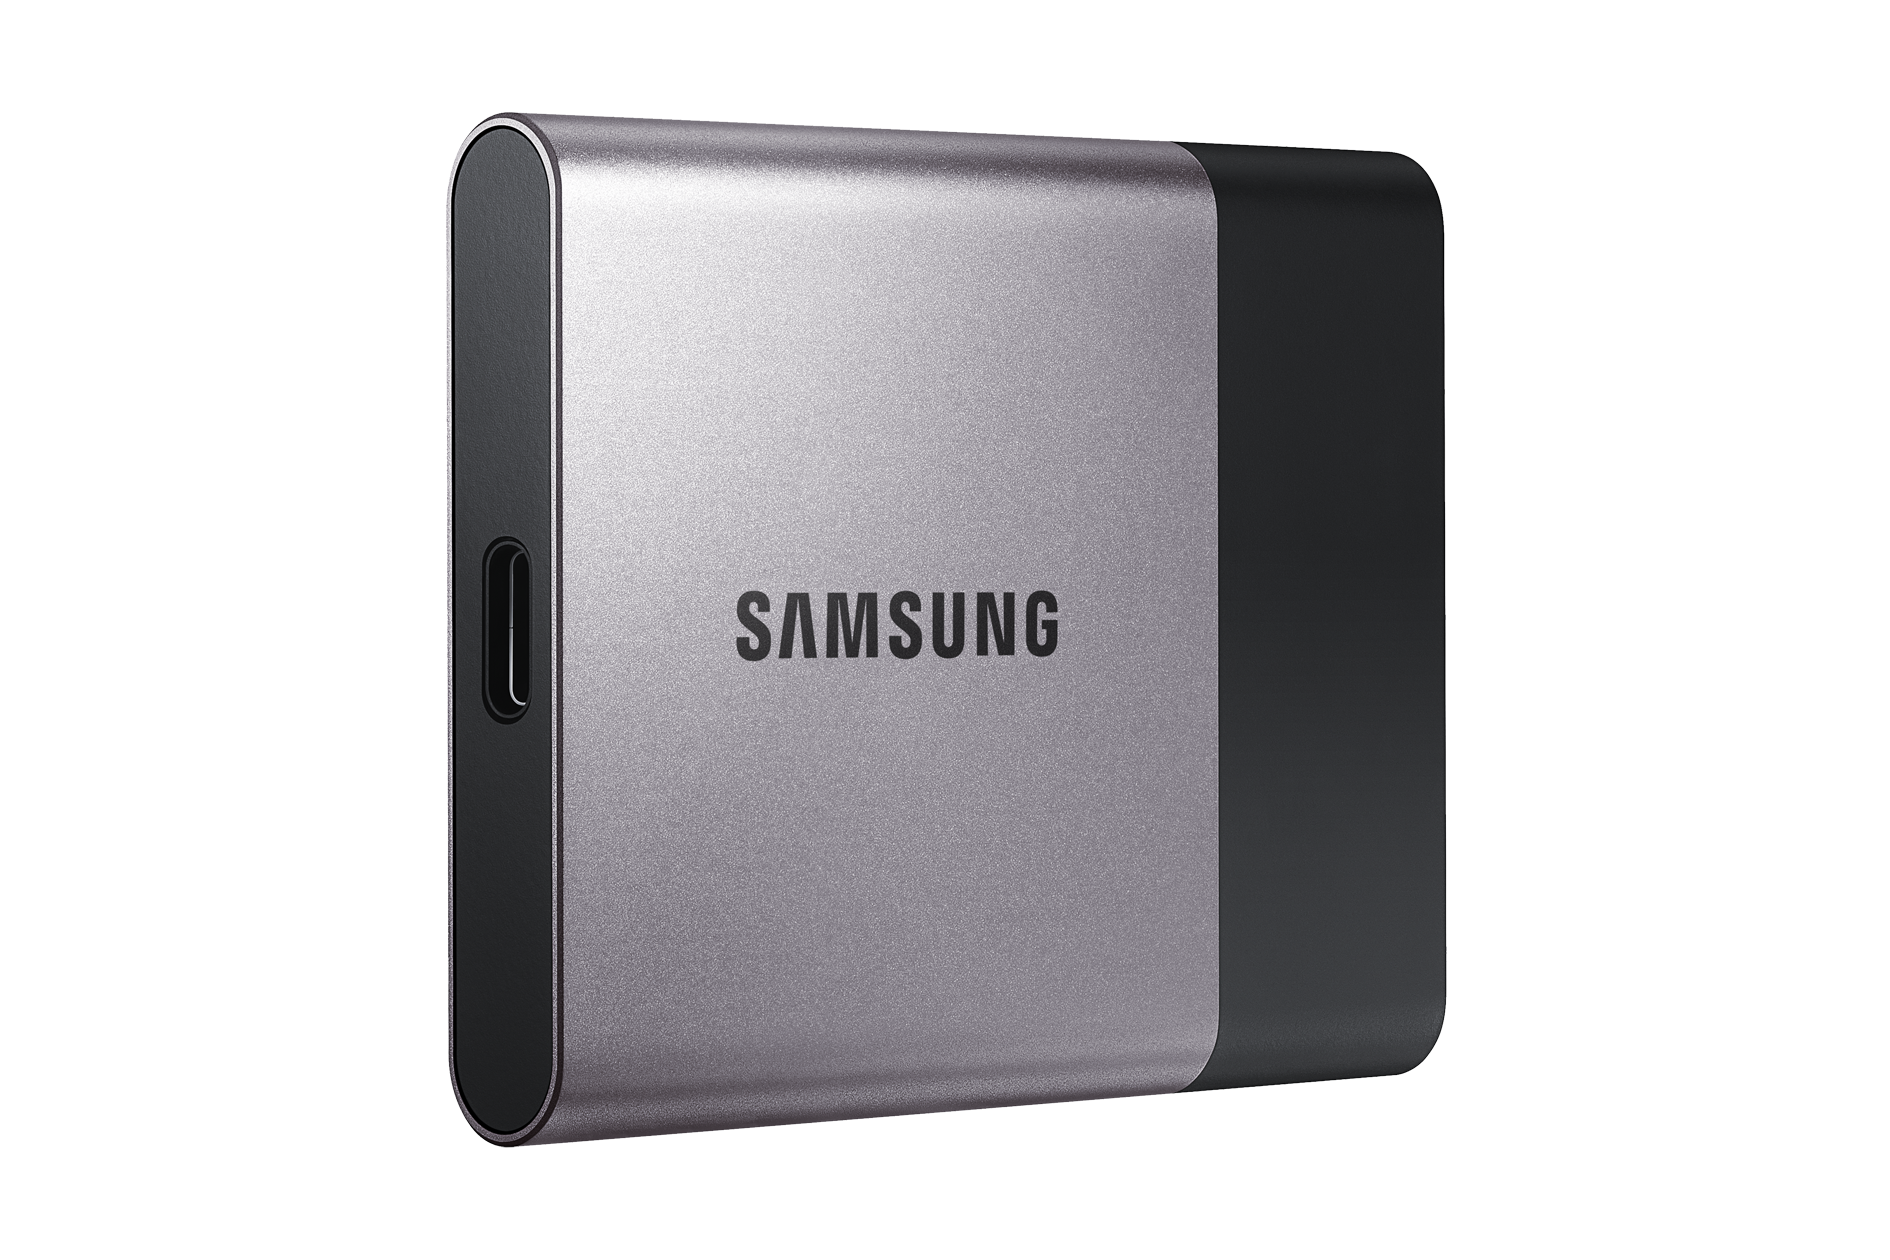 Samsung Portable Ssd Software For Mac Os